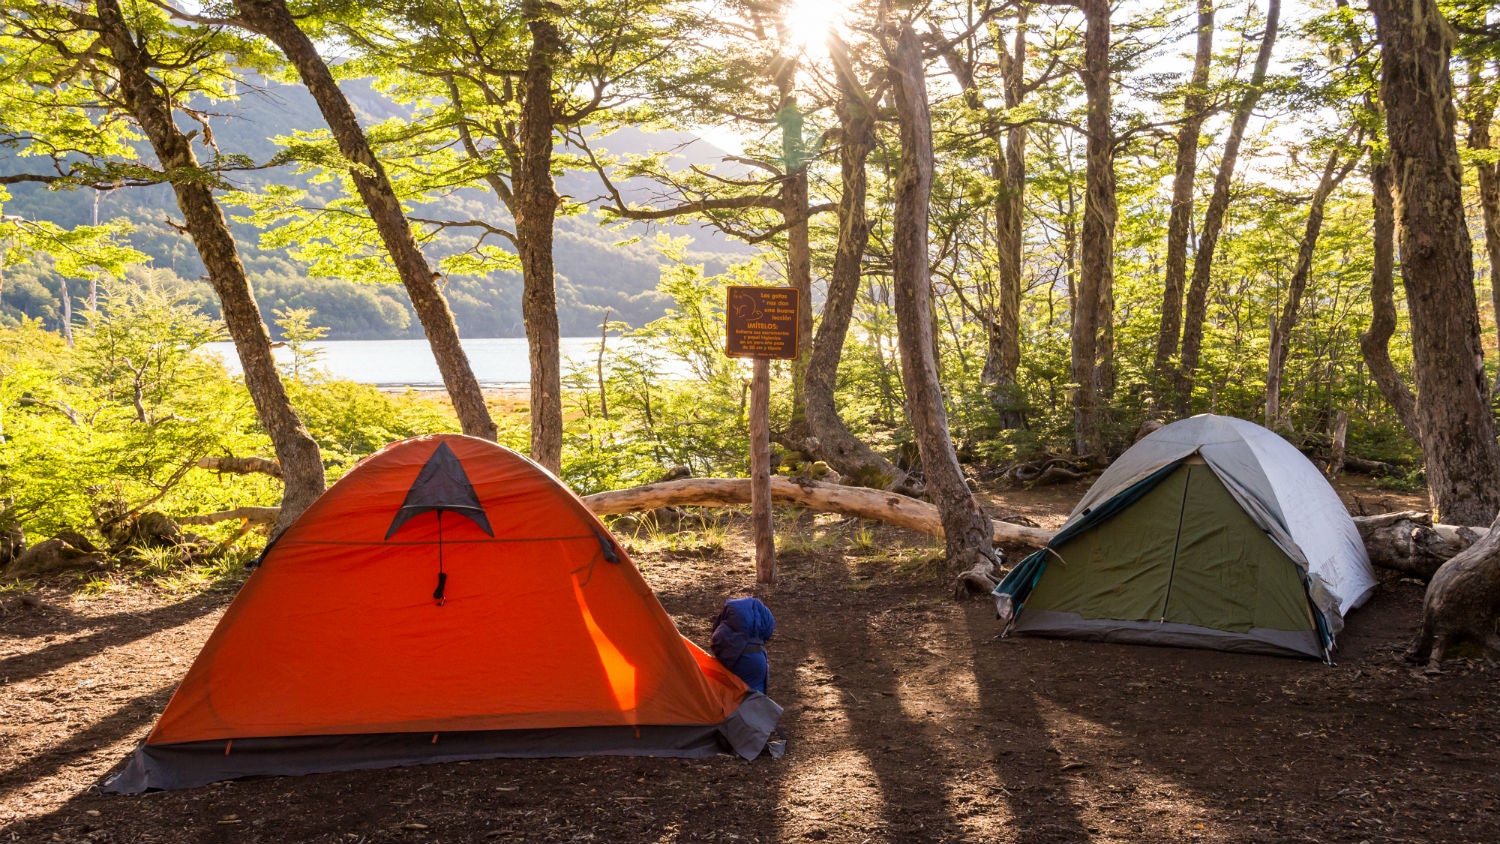 Find the Best Campsite With 7 Tips From Campers Like You